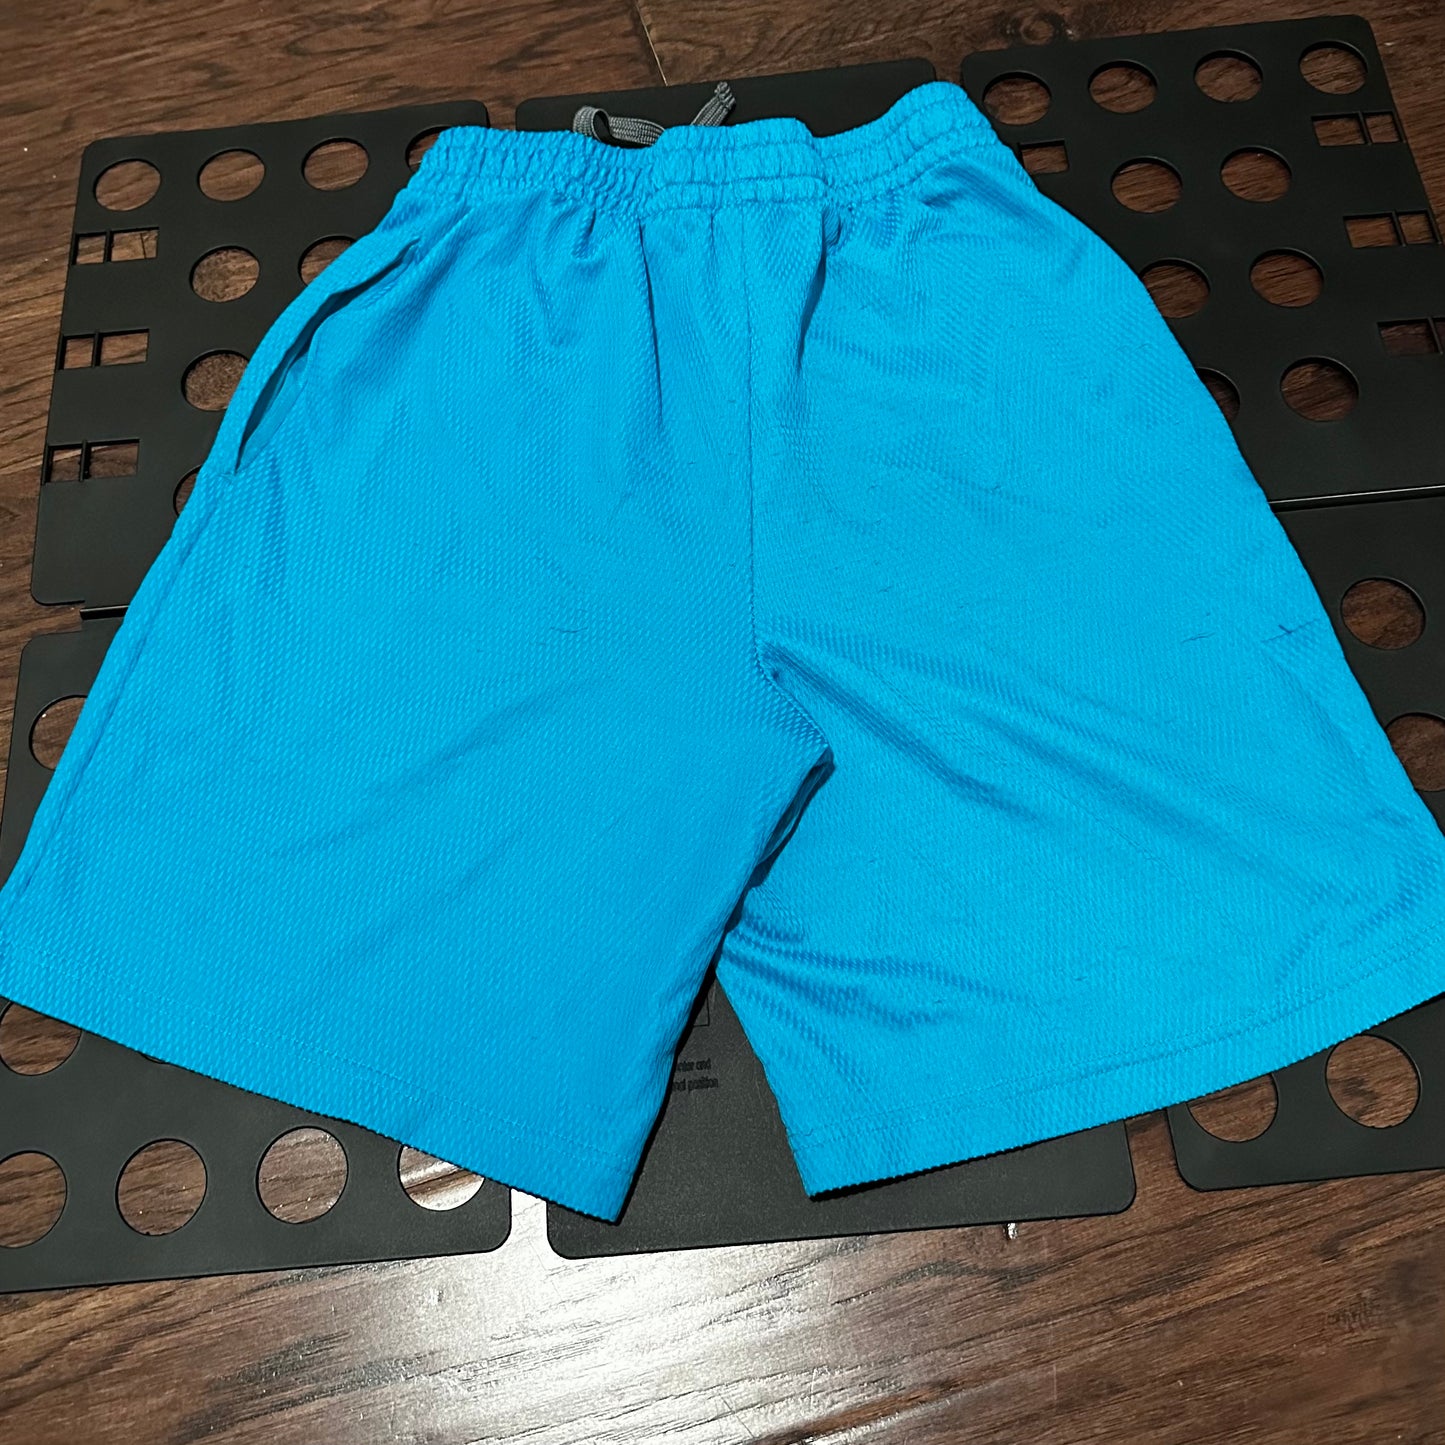 Athletic light blue shorts - Small (28-30)